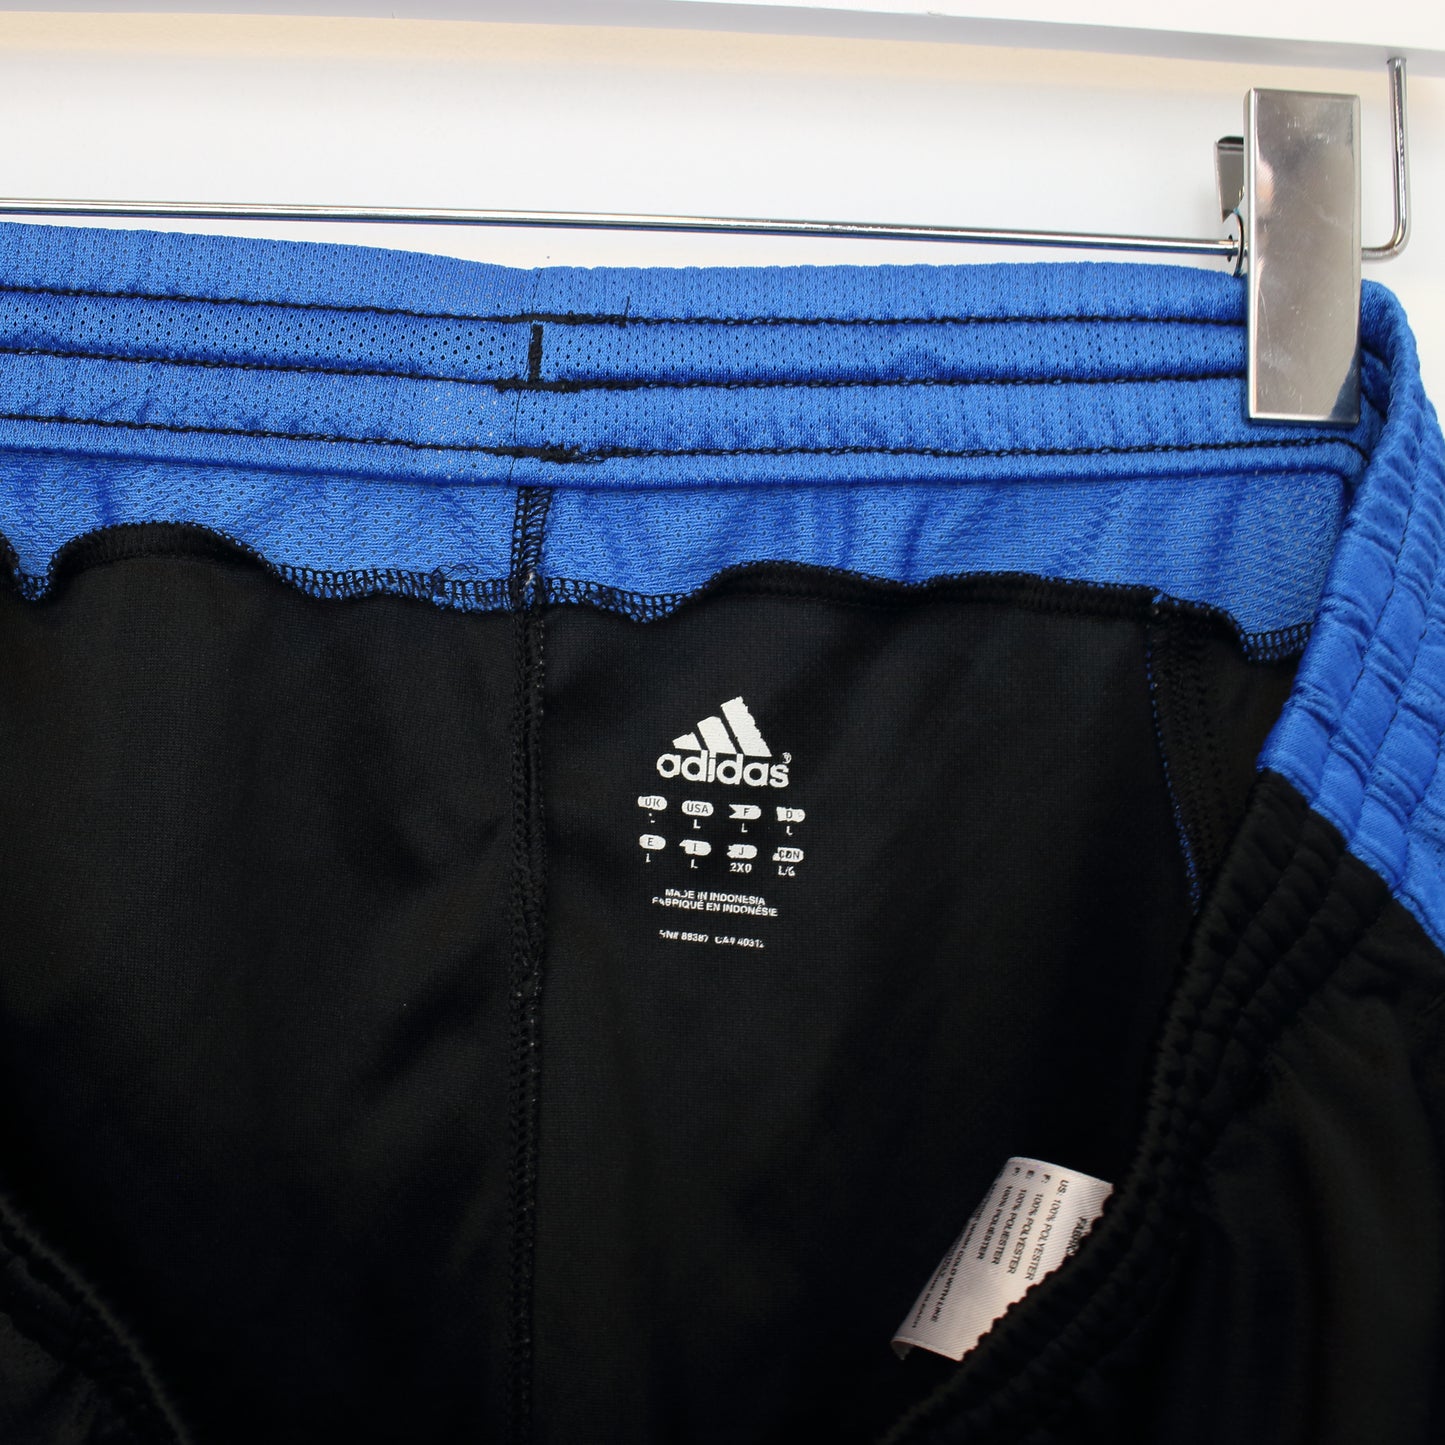 Vintage Adidas shorts in black and blue. Best fits L